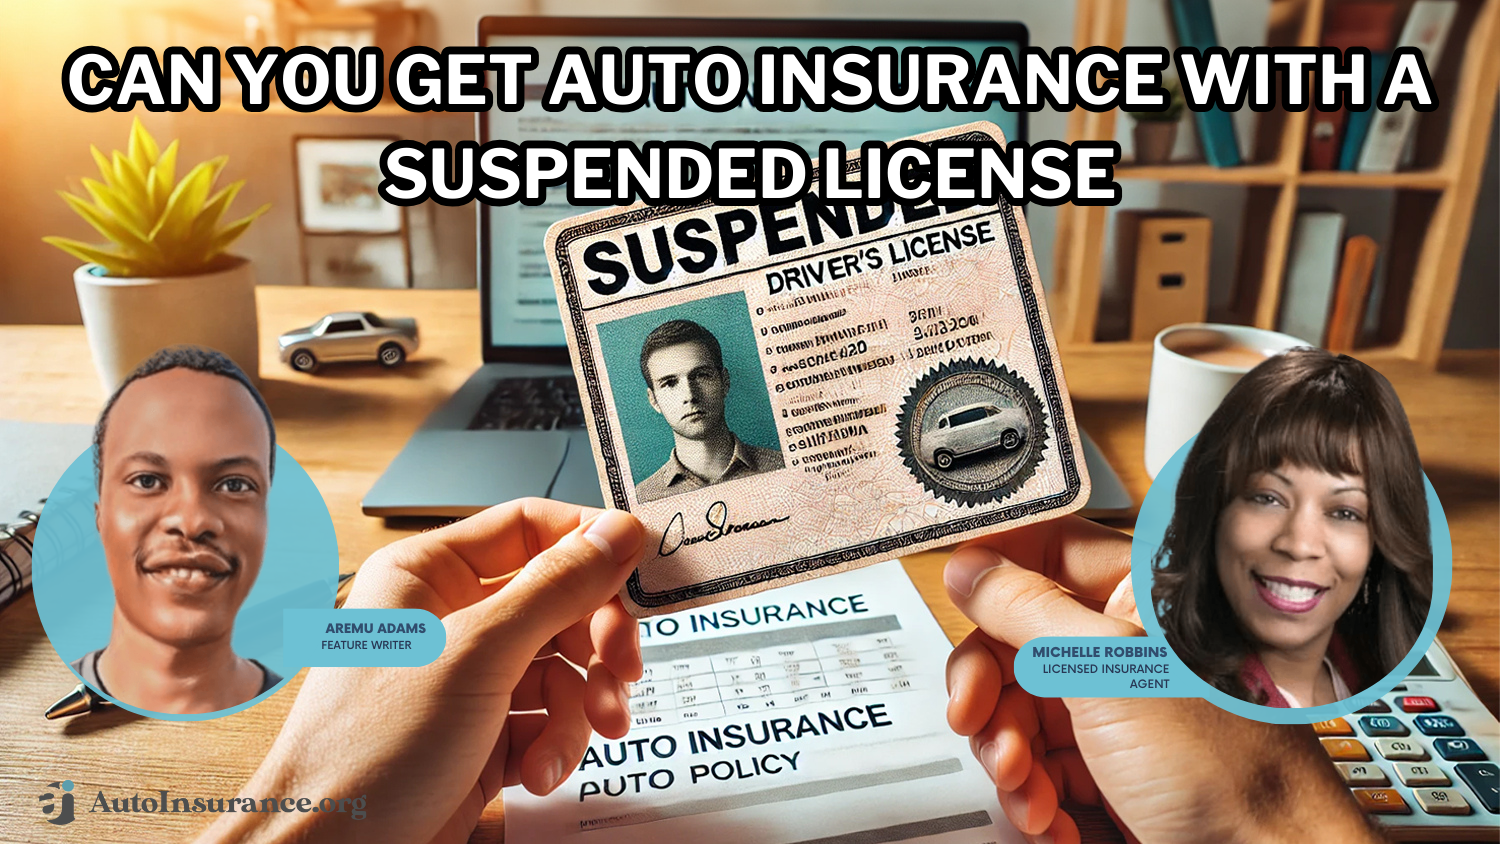 Can you get auto insurance with a suspended license?